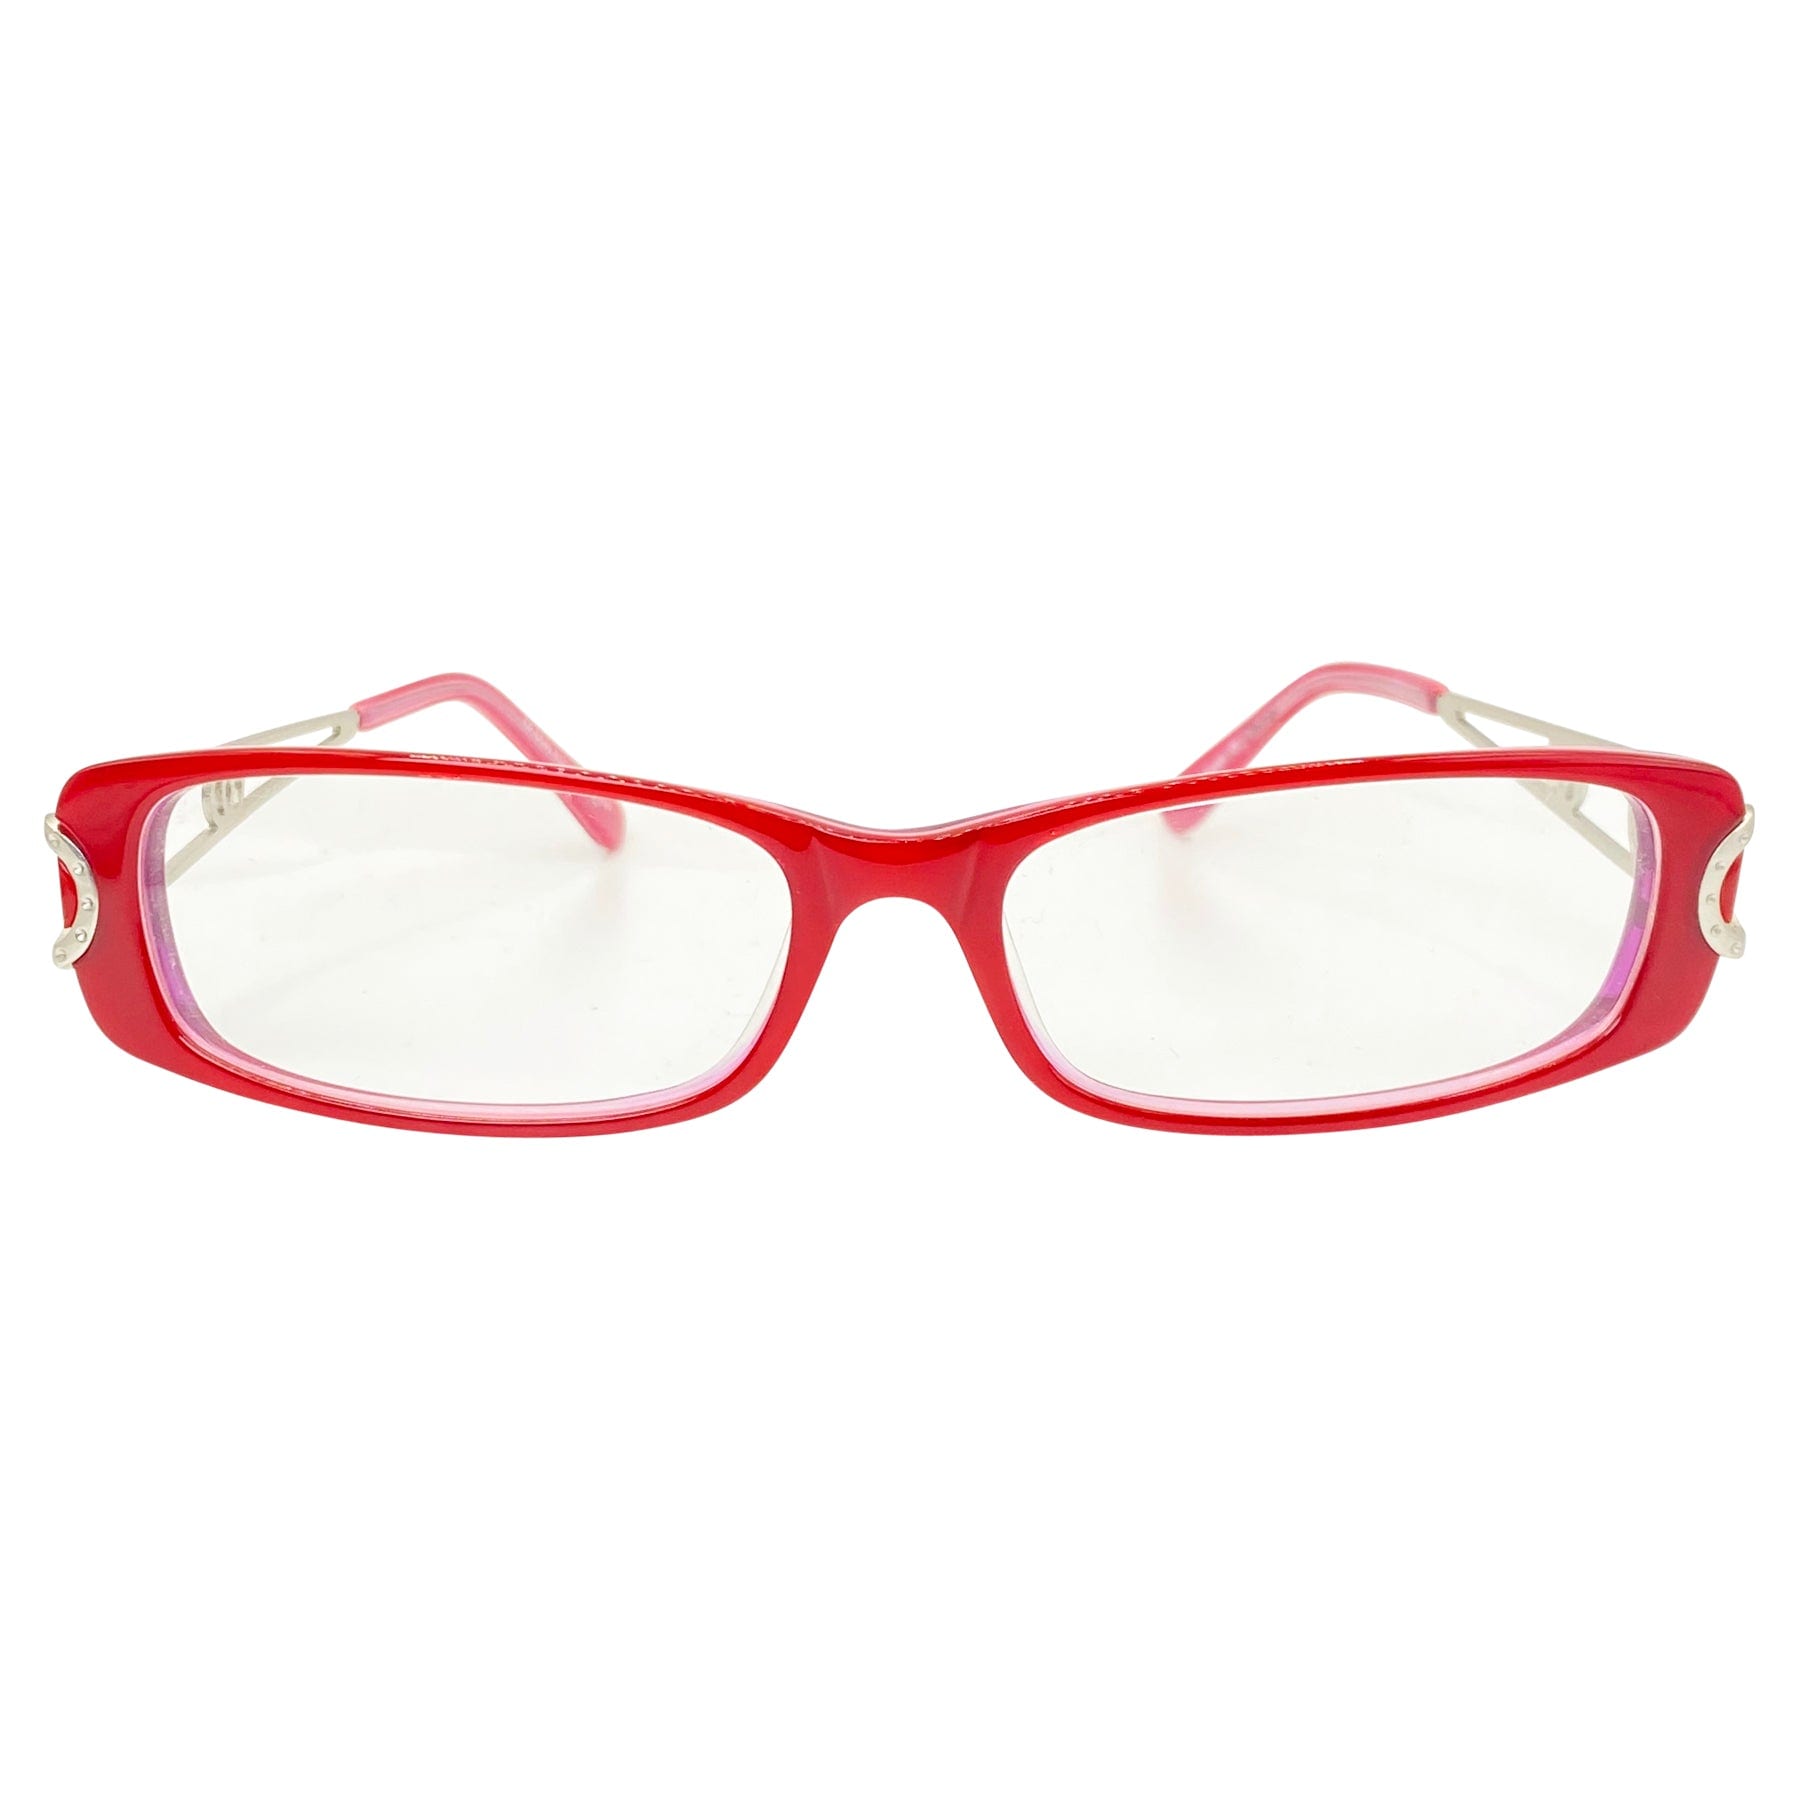 clear fashion glasses with a cherry bayonetta style frame